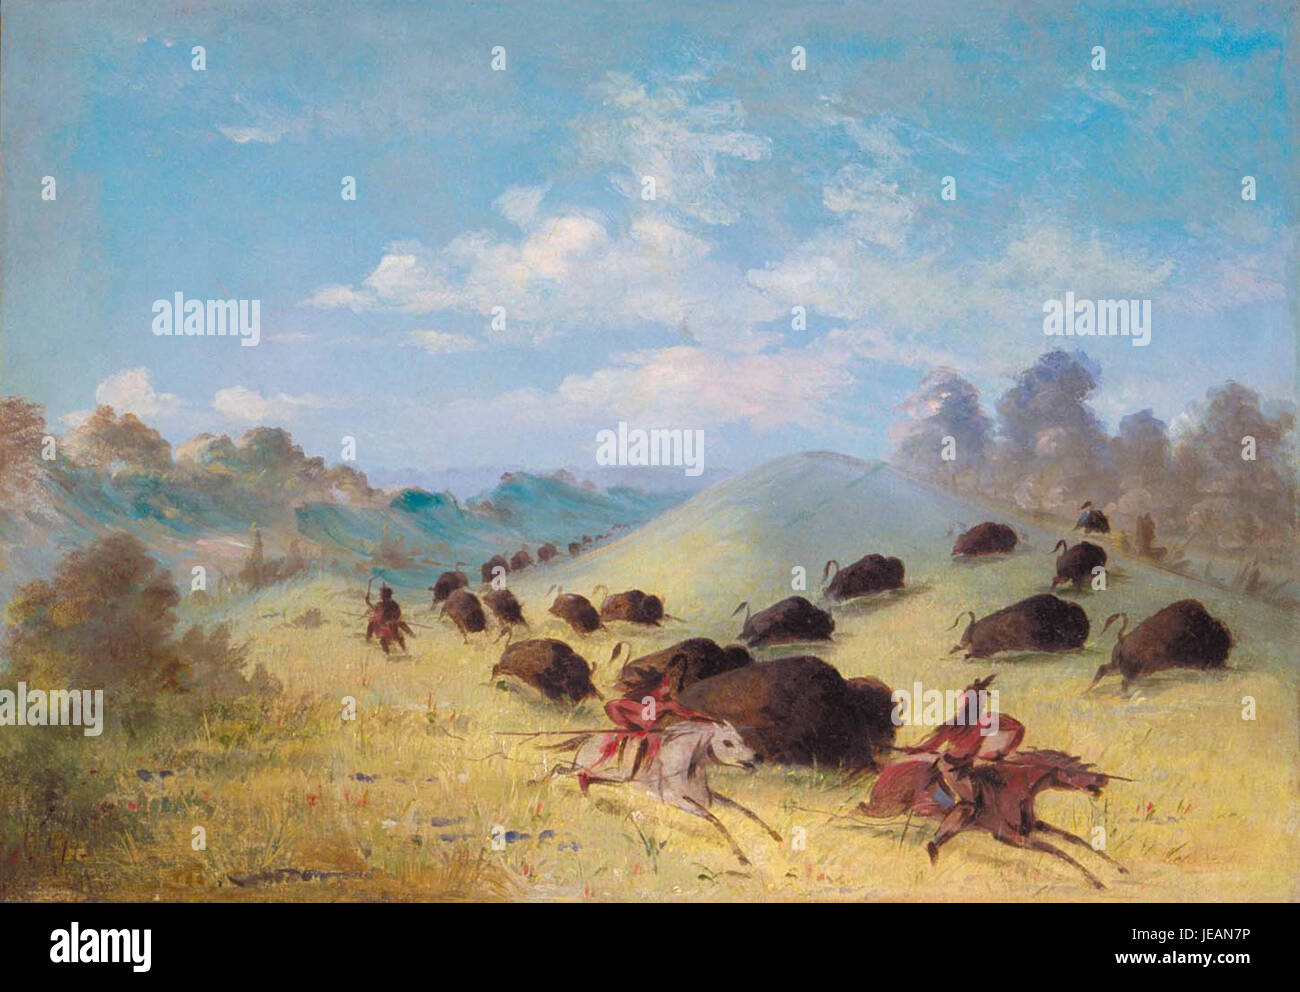 Comanche Indians Chasing Buffalo with Lances and Bows Stock Photo